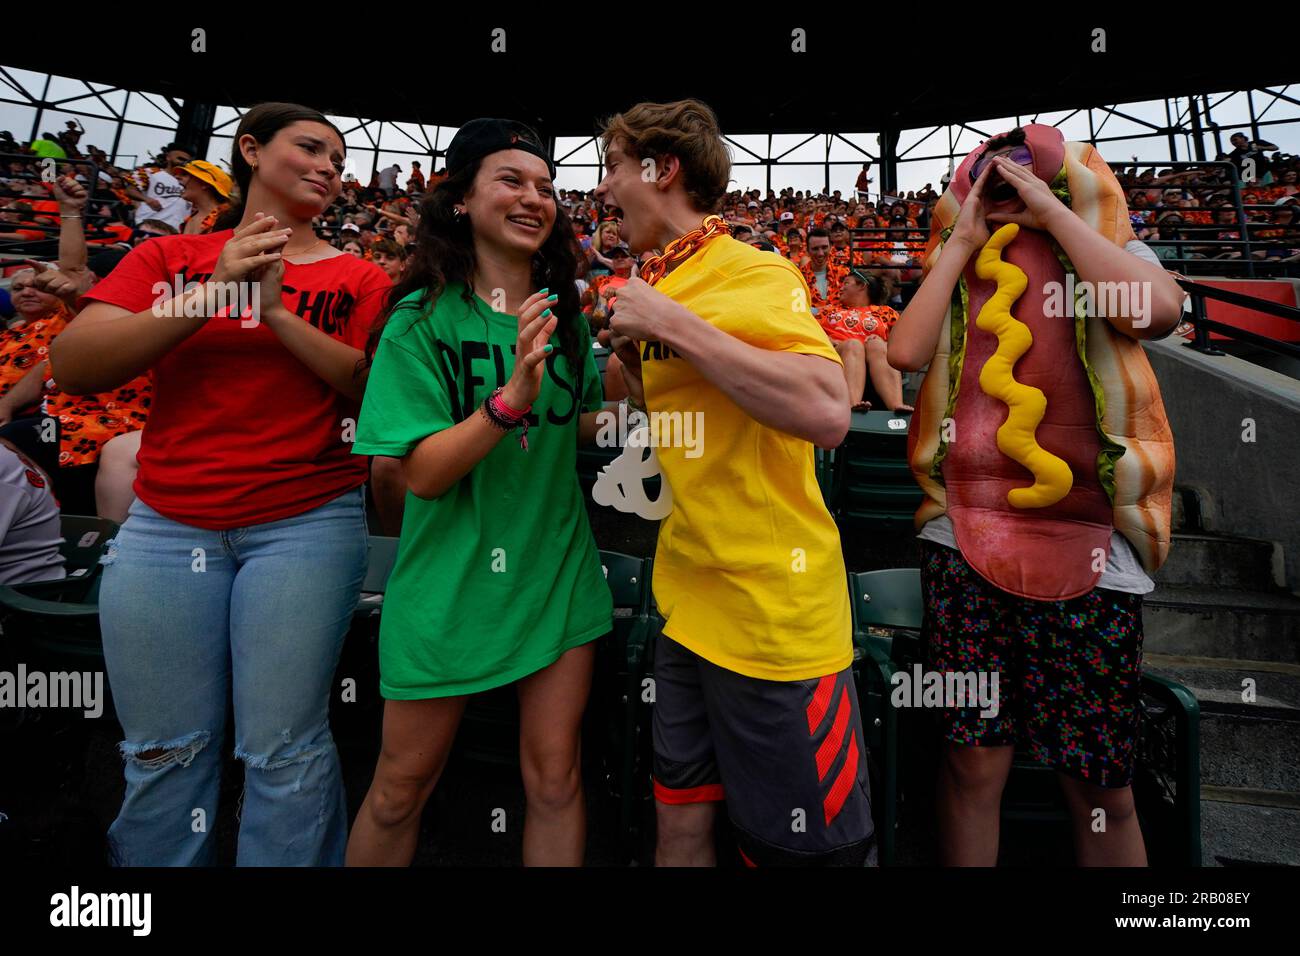 Siblings, from left, Olivia Nerad, Brooke Conger, Charles Nerad, John  Conger react after watching the Hot Dog Race on the big screen at Oriole  Park at Camden Yards during the fifth inning